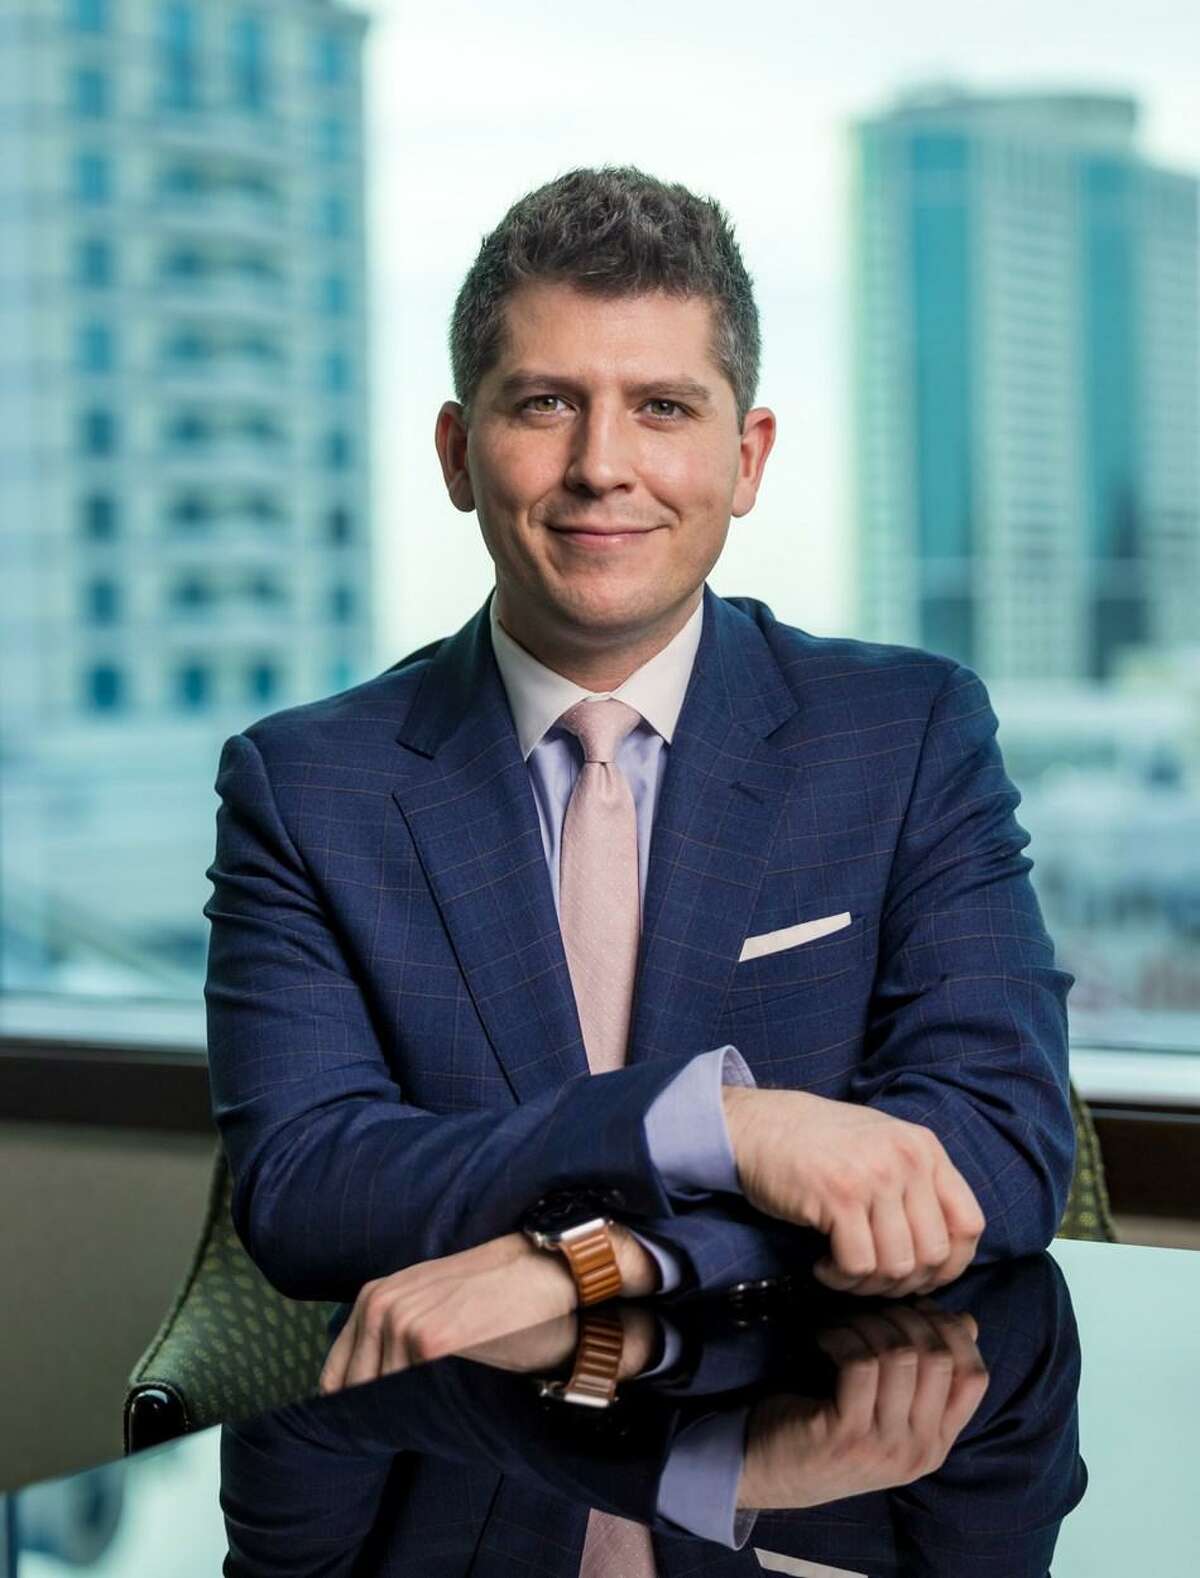 Jason Guyot Foxwoods Resort Casino's new president and chief executive officer. He had served as interim CEO since April 2020.